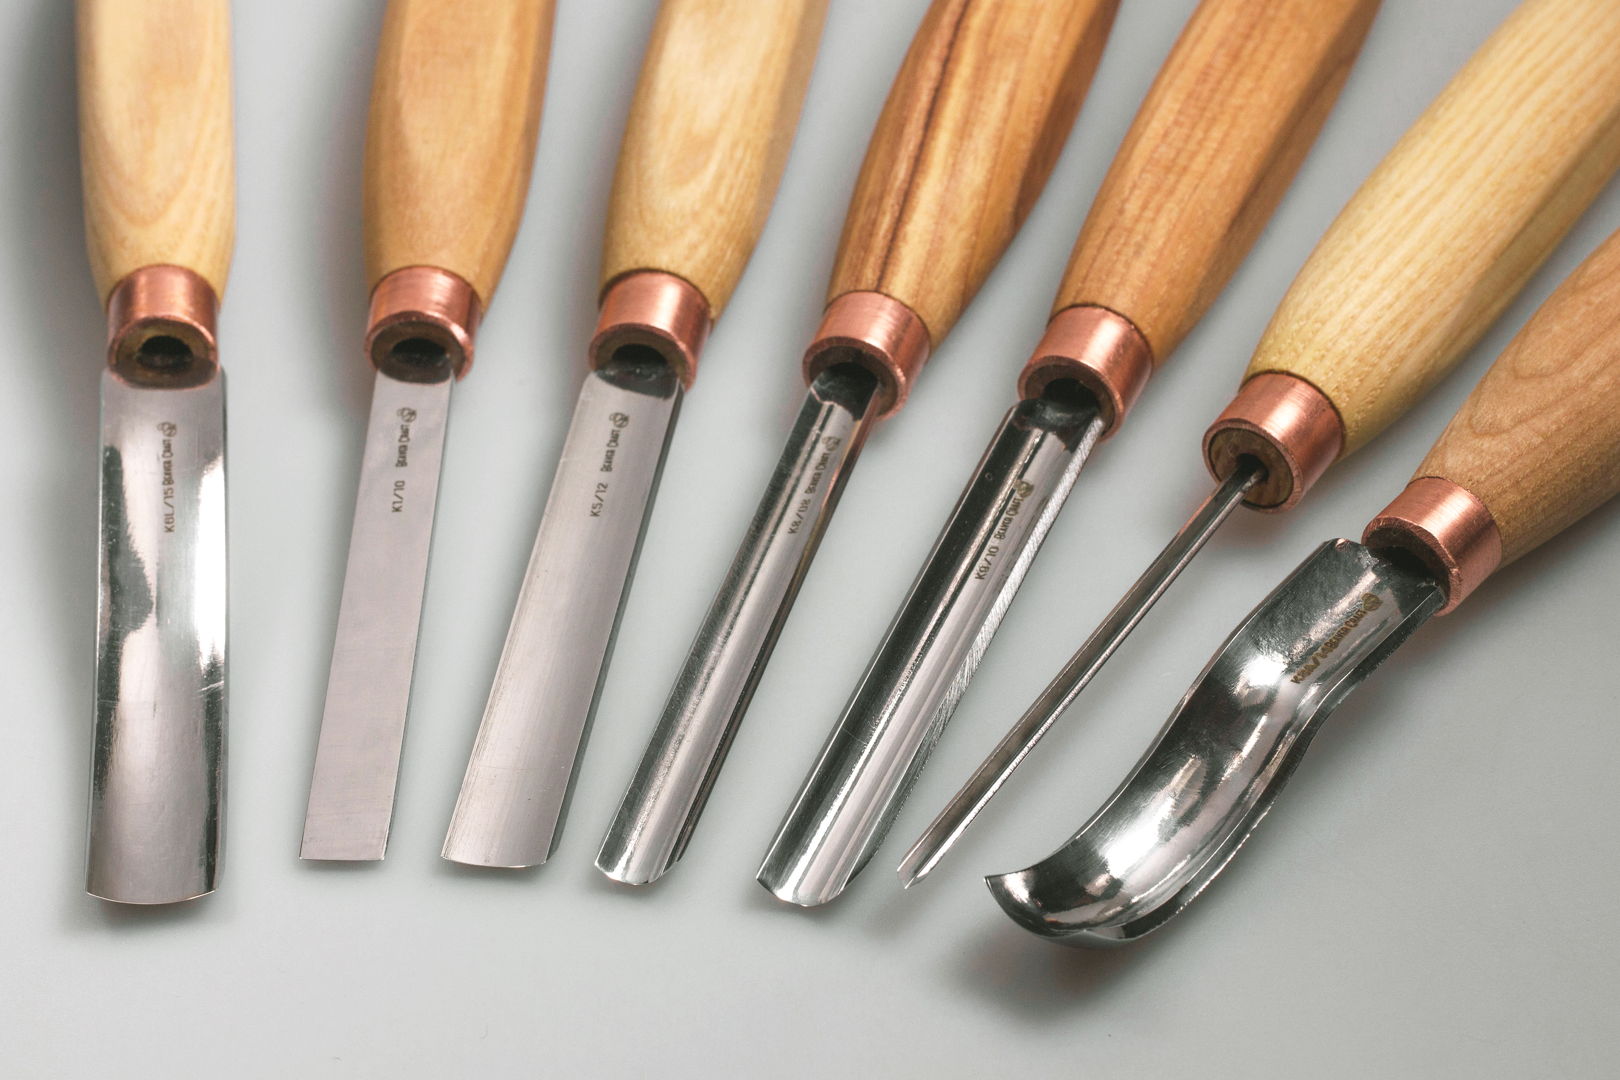 SC03 - Wood Carving Set of 7 Chisels